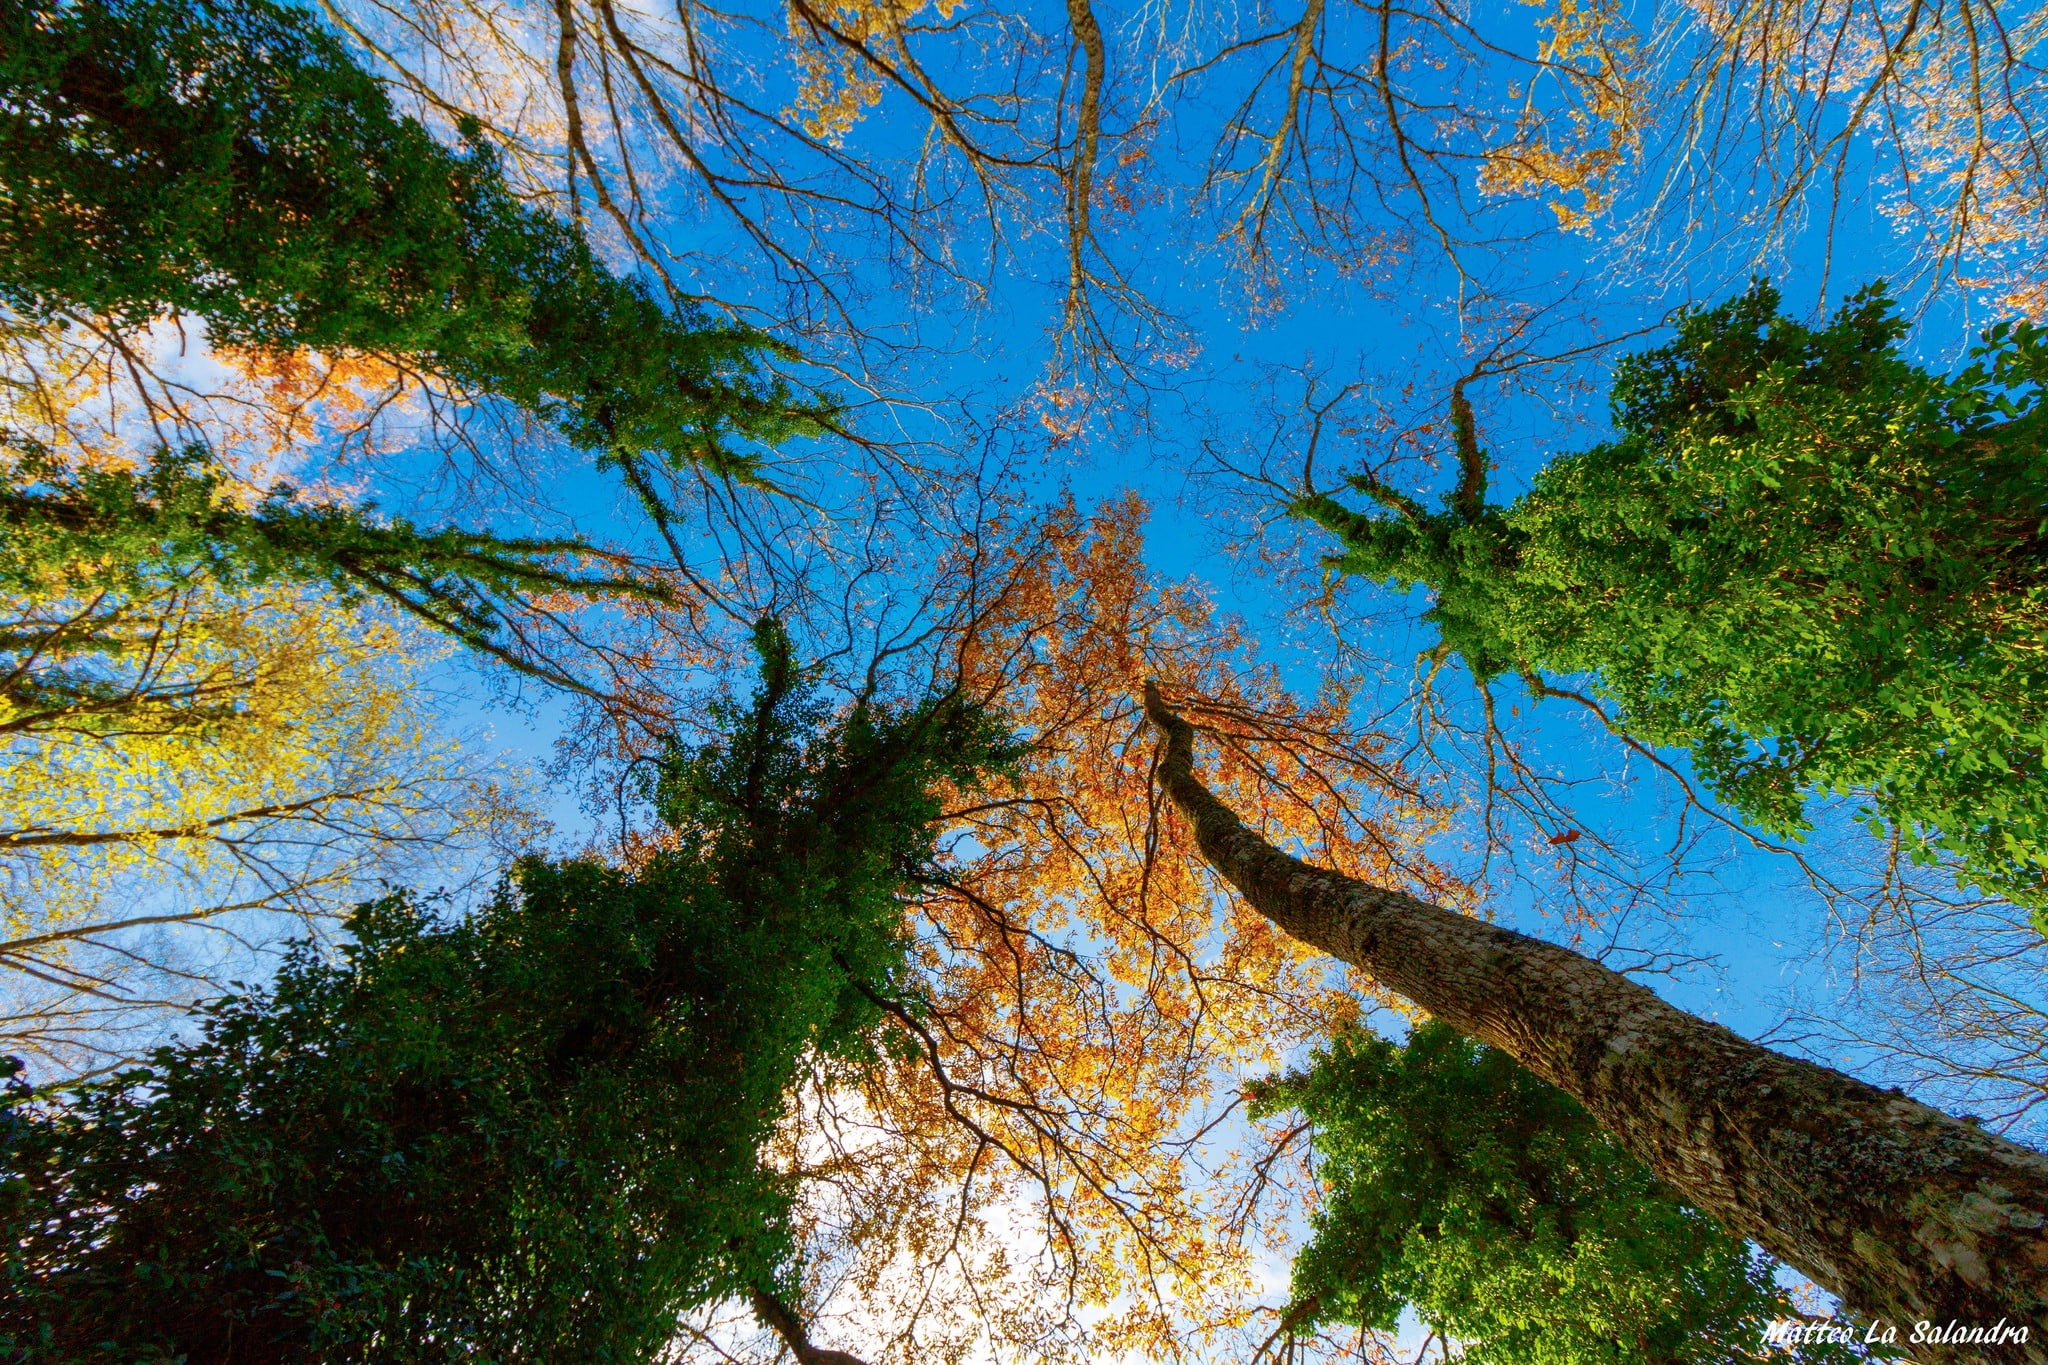 green leafed tree, sky, nature, trees, worm's eye view